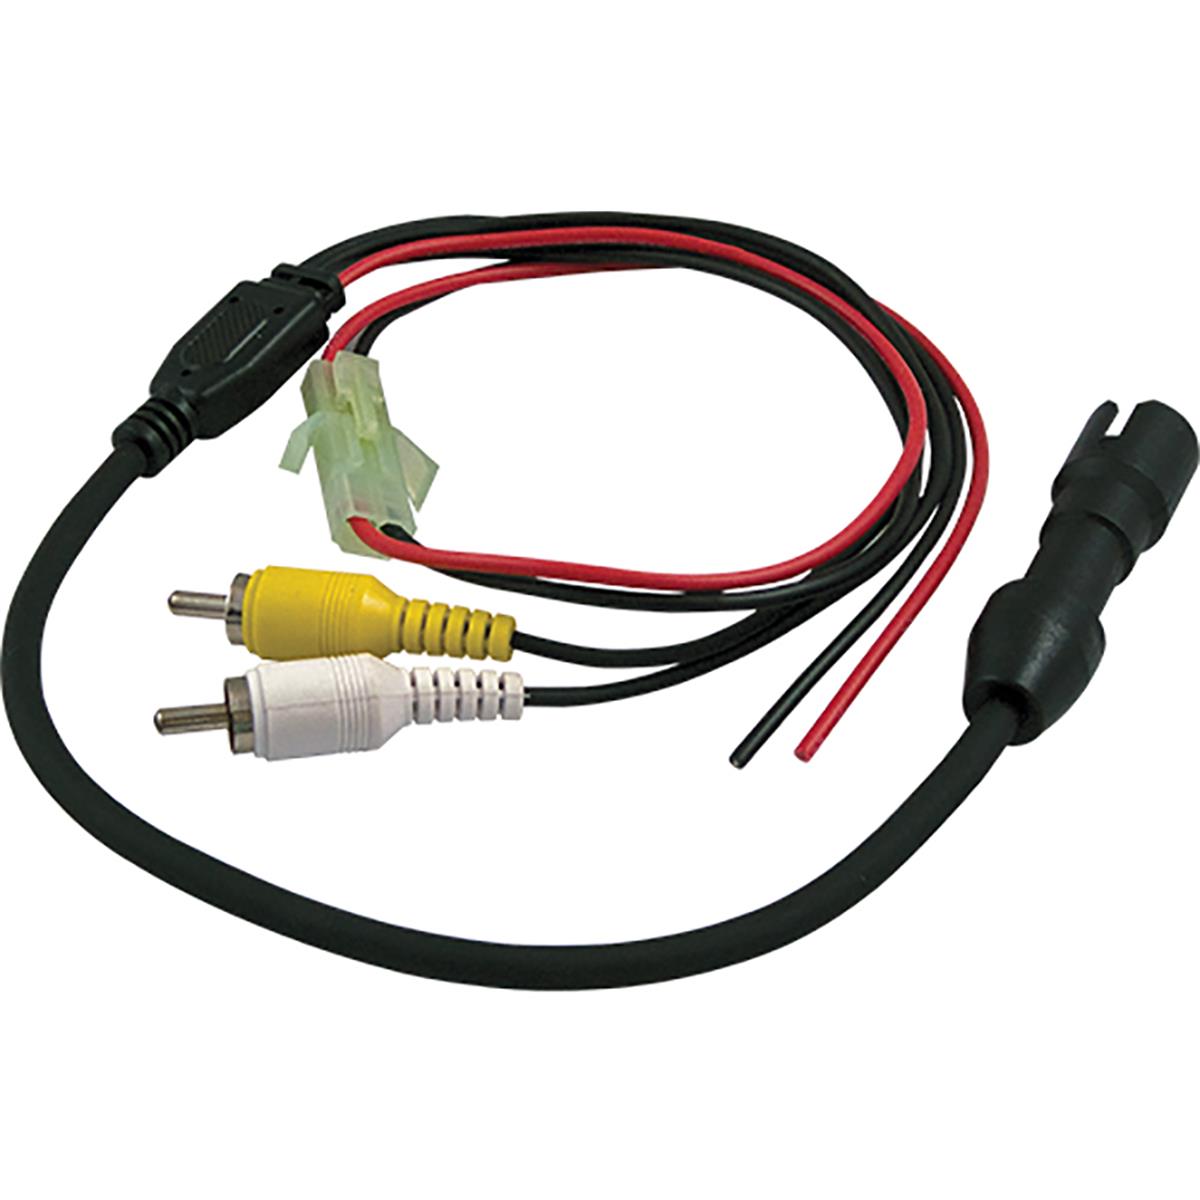 Picture of Voyager 31300006 RCA to CEC Camera Connector